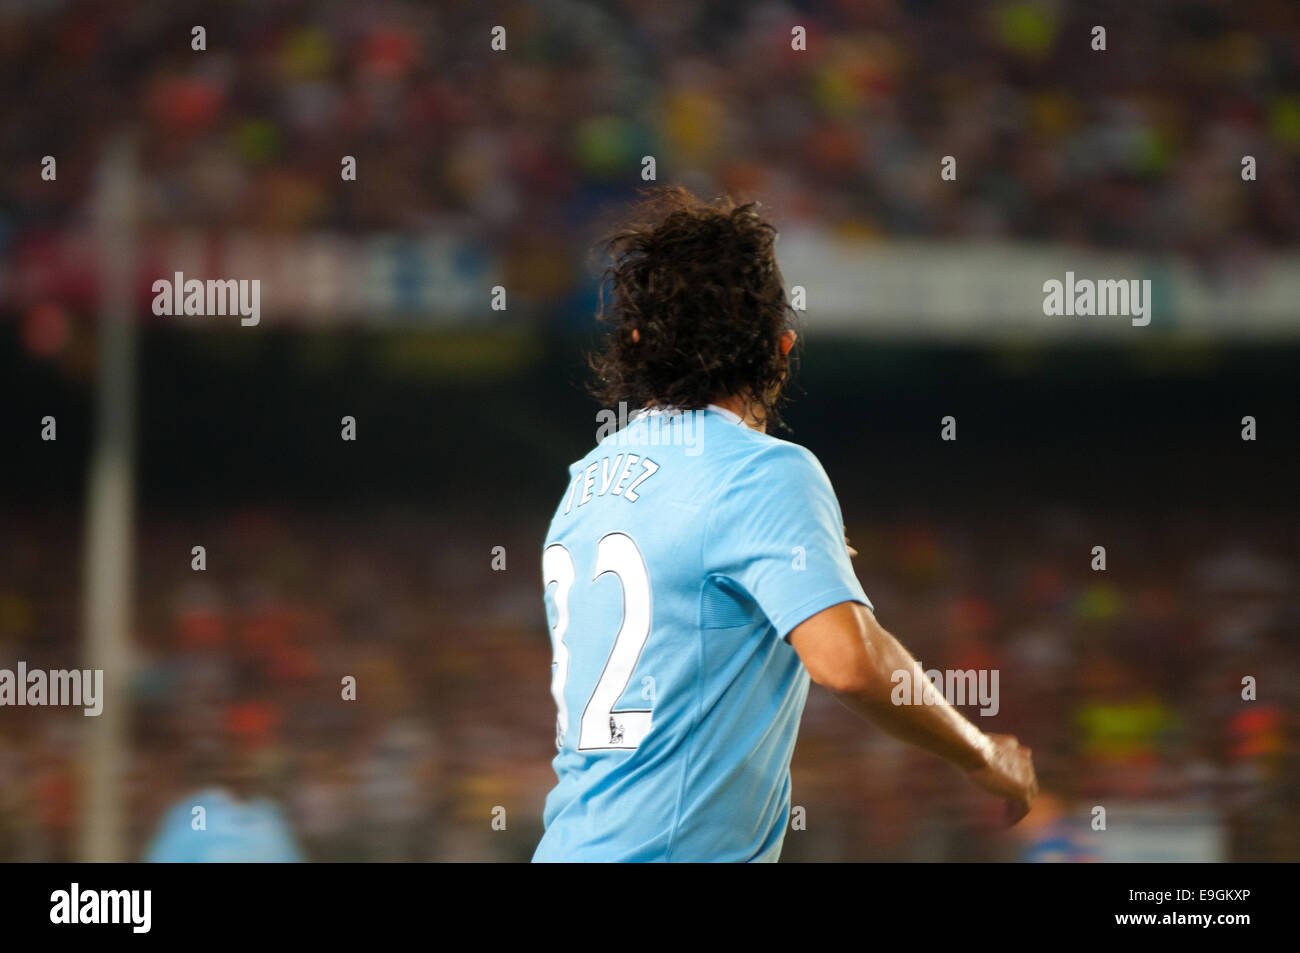 BARCELONA - AUG 19: Carlos Tevez, Manchester City player, plays against Carles Puyol, of F.C Barcelona. Joan Gamper Throphy. Stock Photo